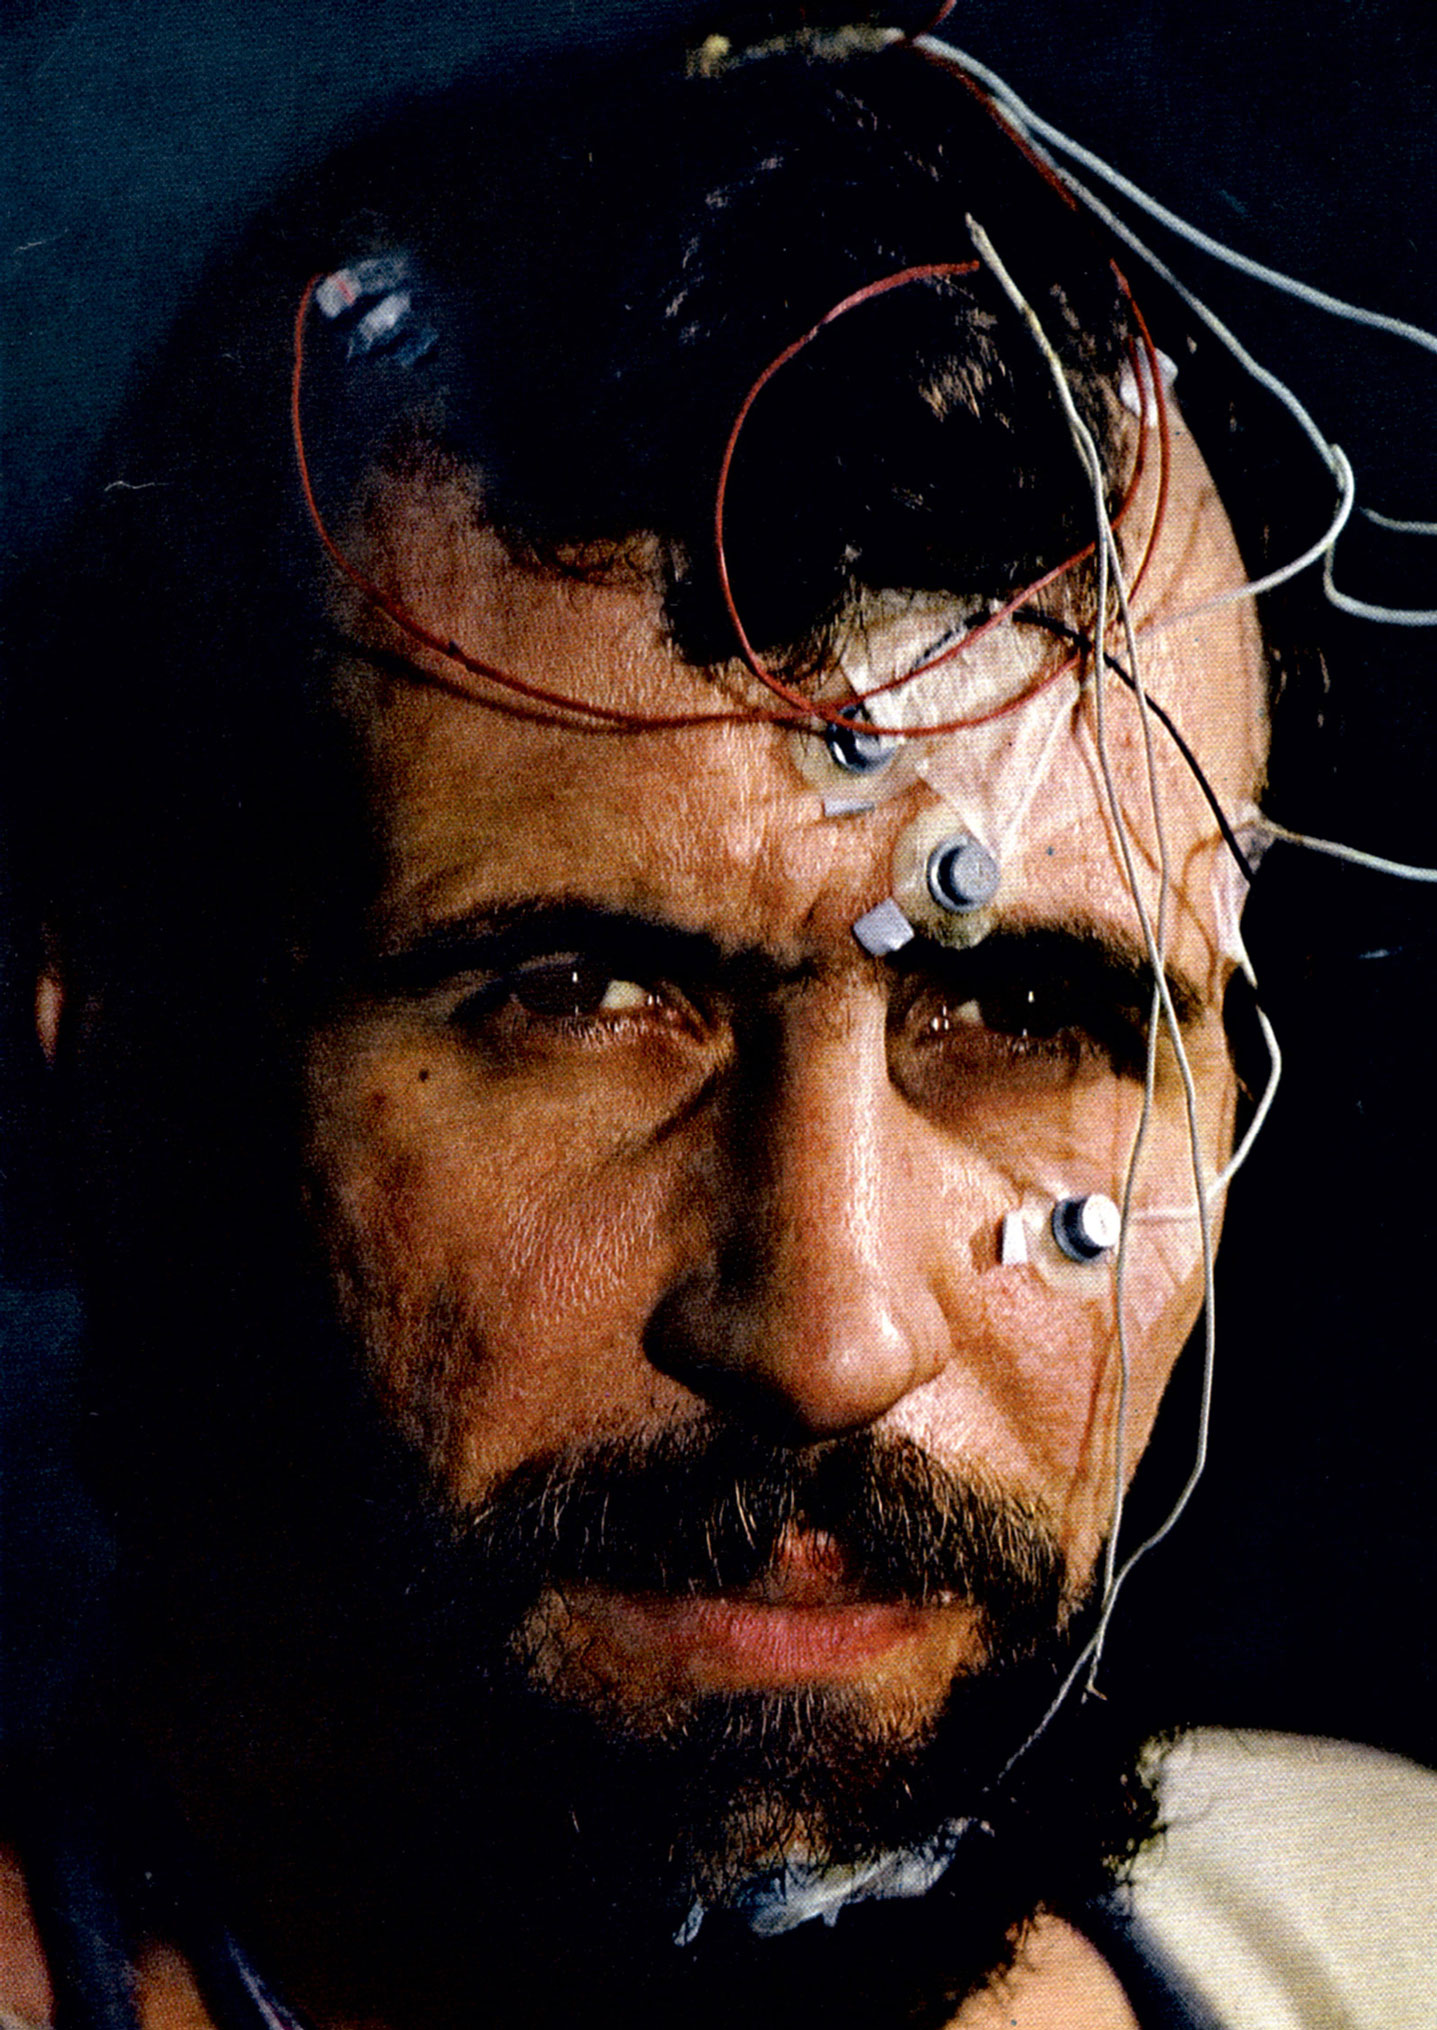 A photograph of Siffre adorned with the electrodes that monitored his heart, brain, and muscle activity during his nineteen seventy-two experiment.